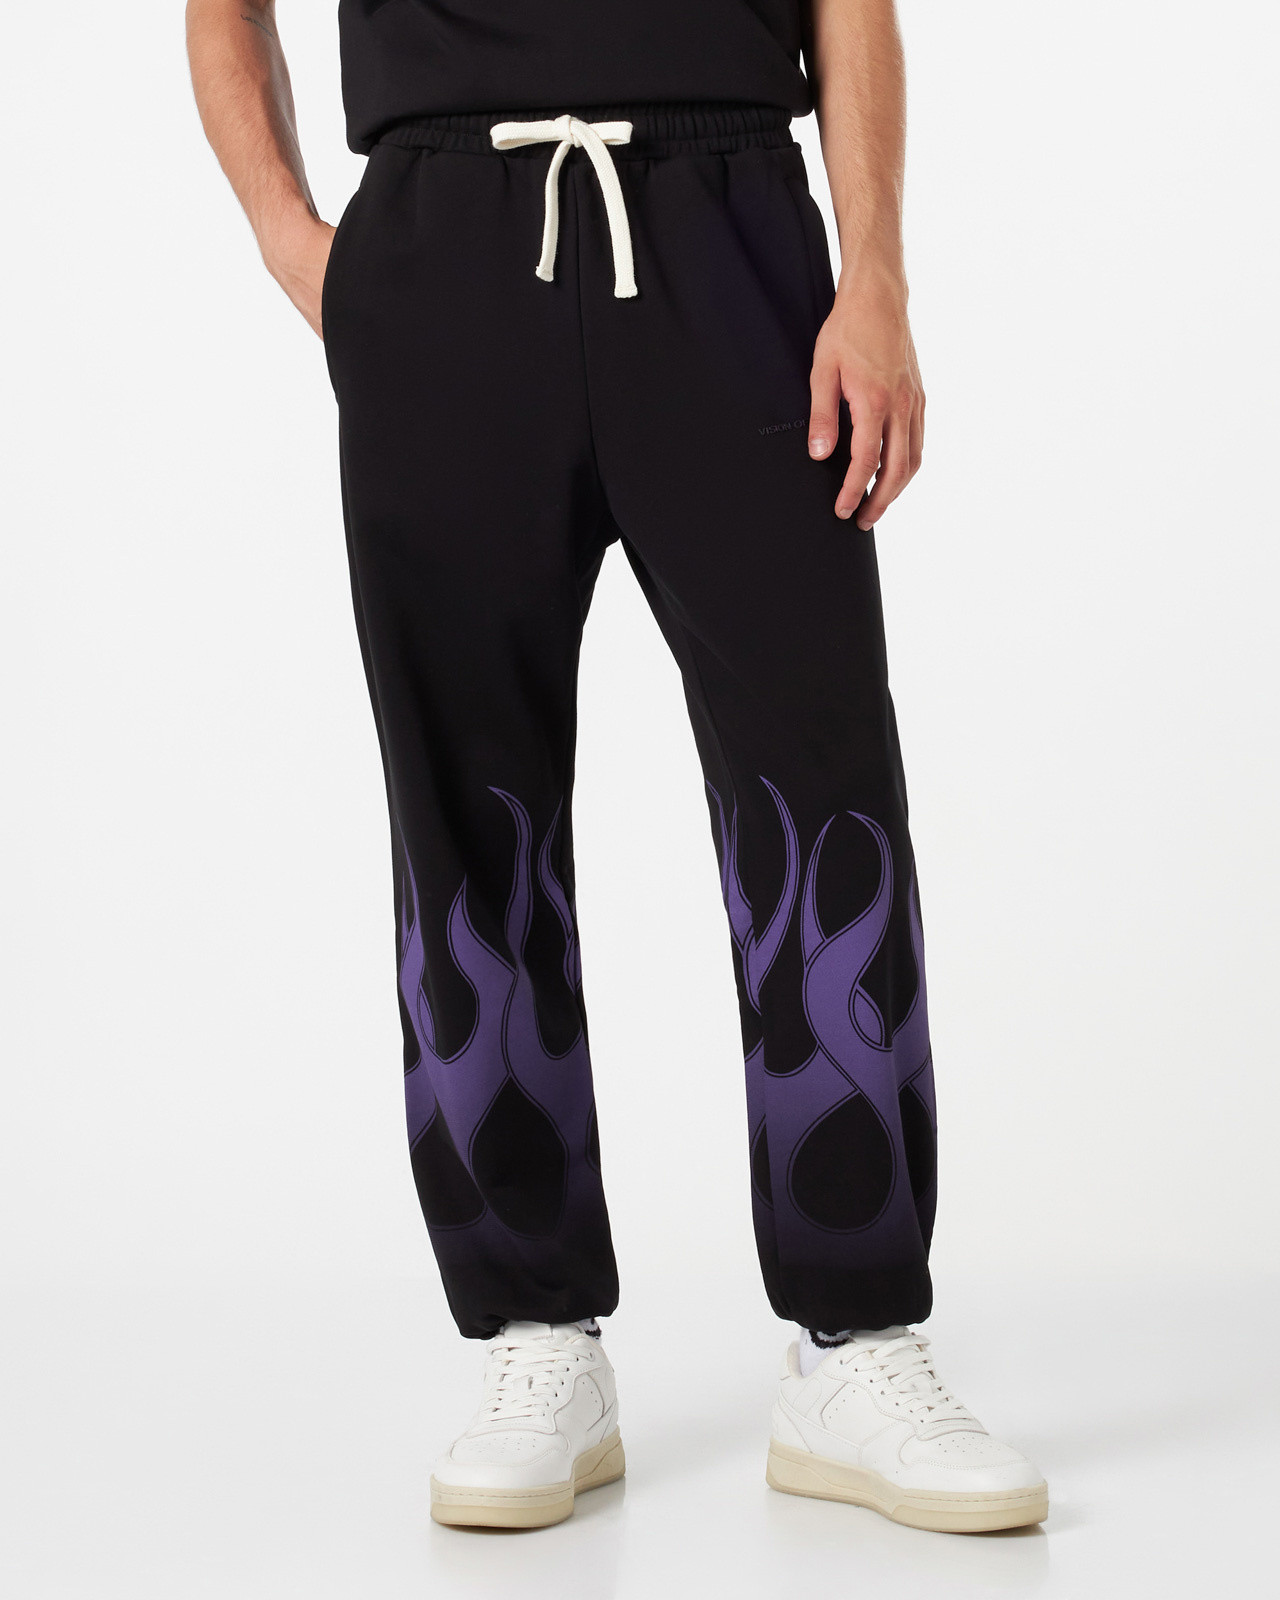 Vision of Super - Pants with racing flames, Black, large image number 3